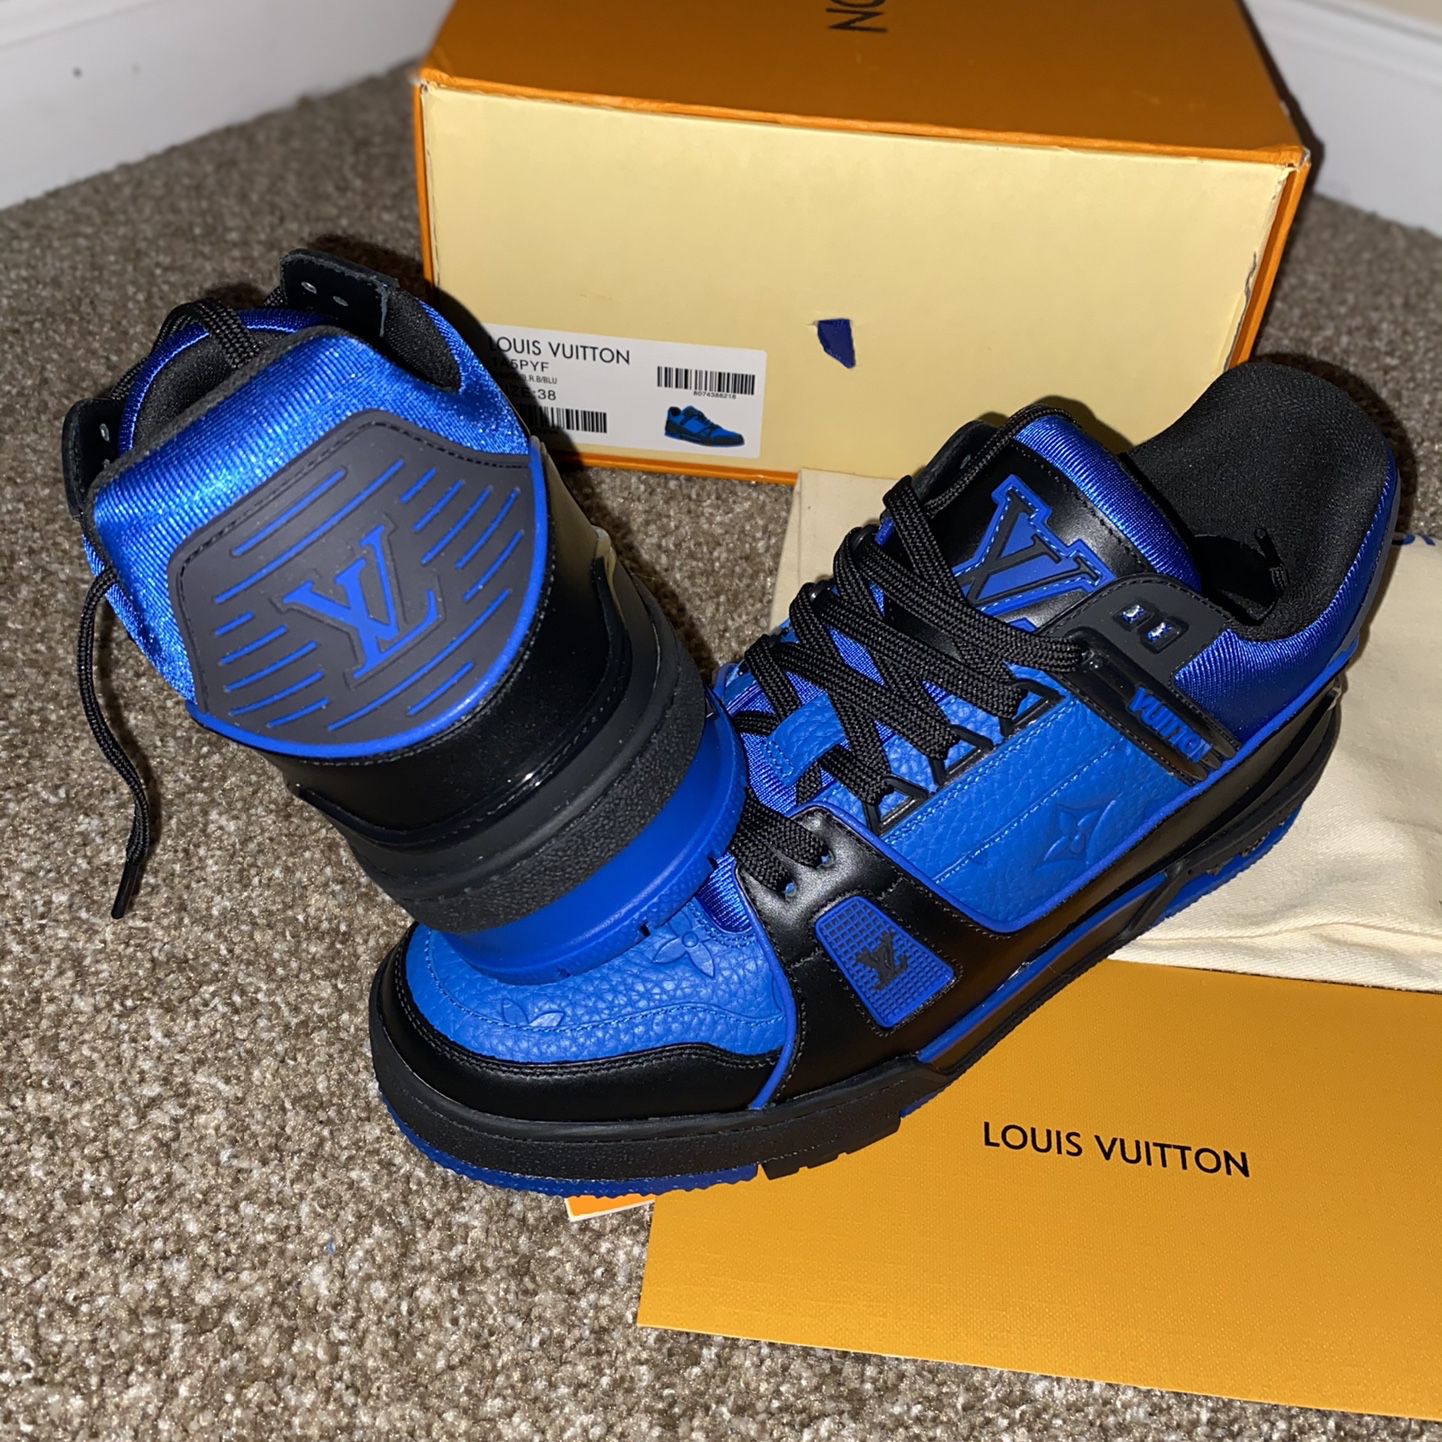 Louis Vuitton Trainer Azur Stone for Sale in Cleveland, OH - OfferUp